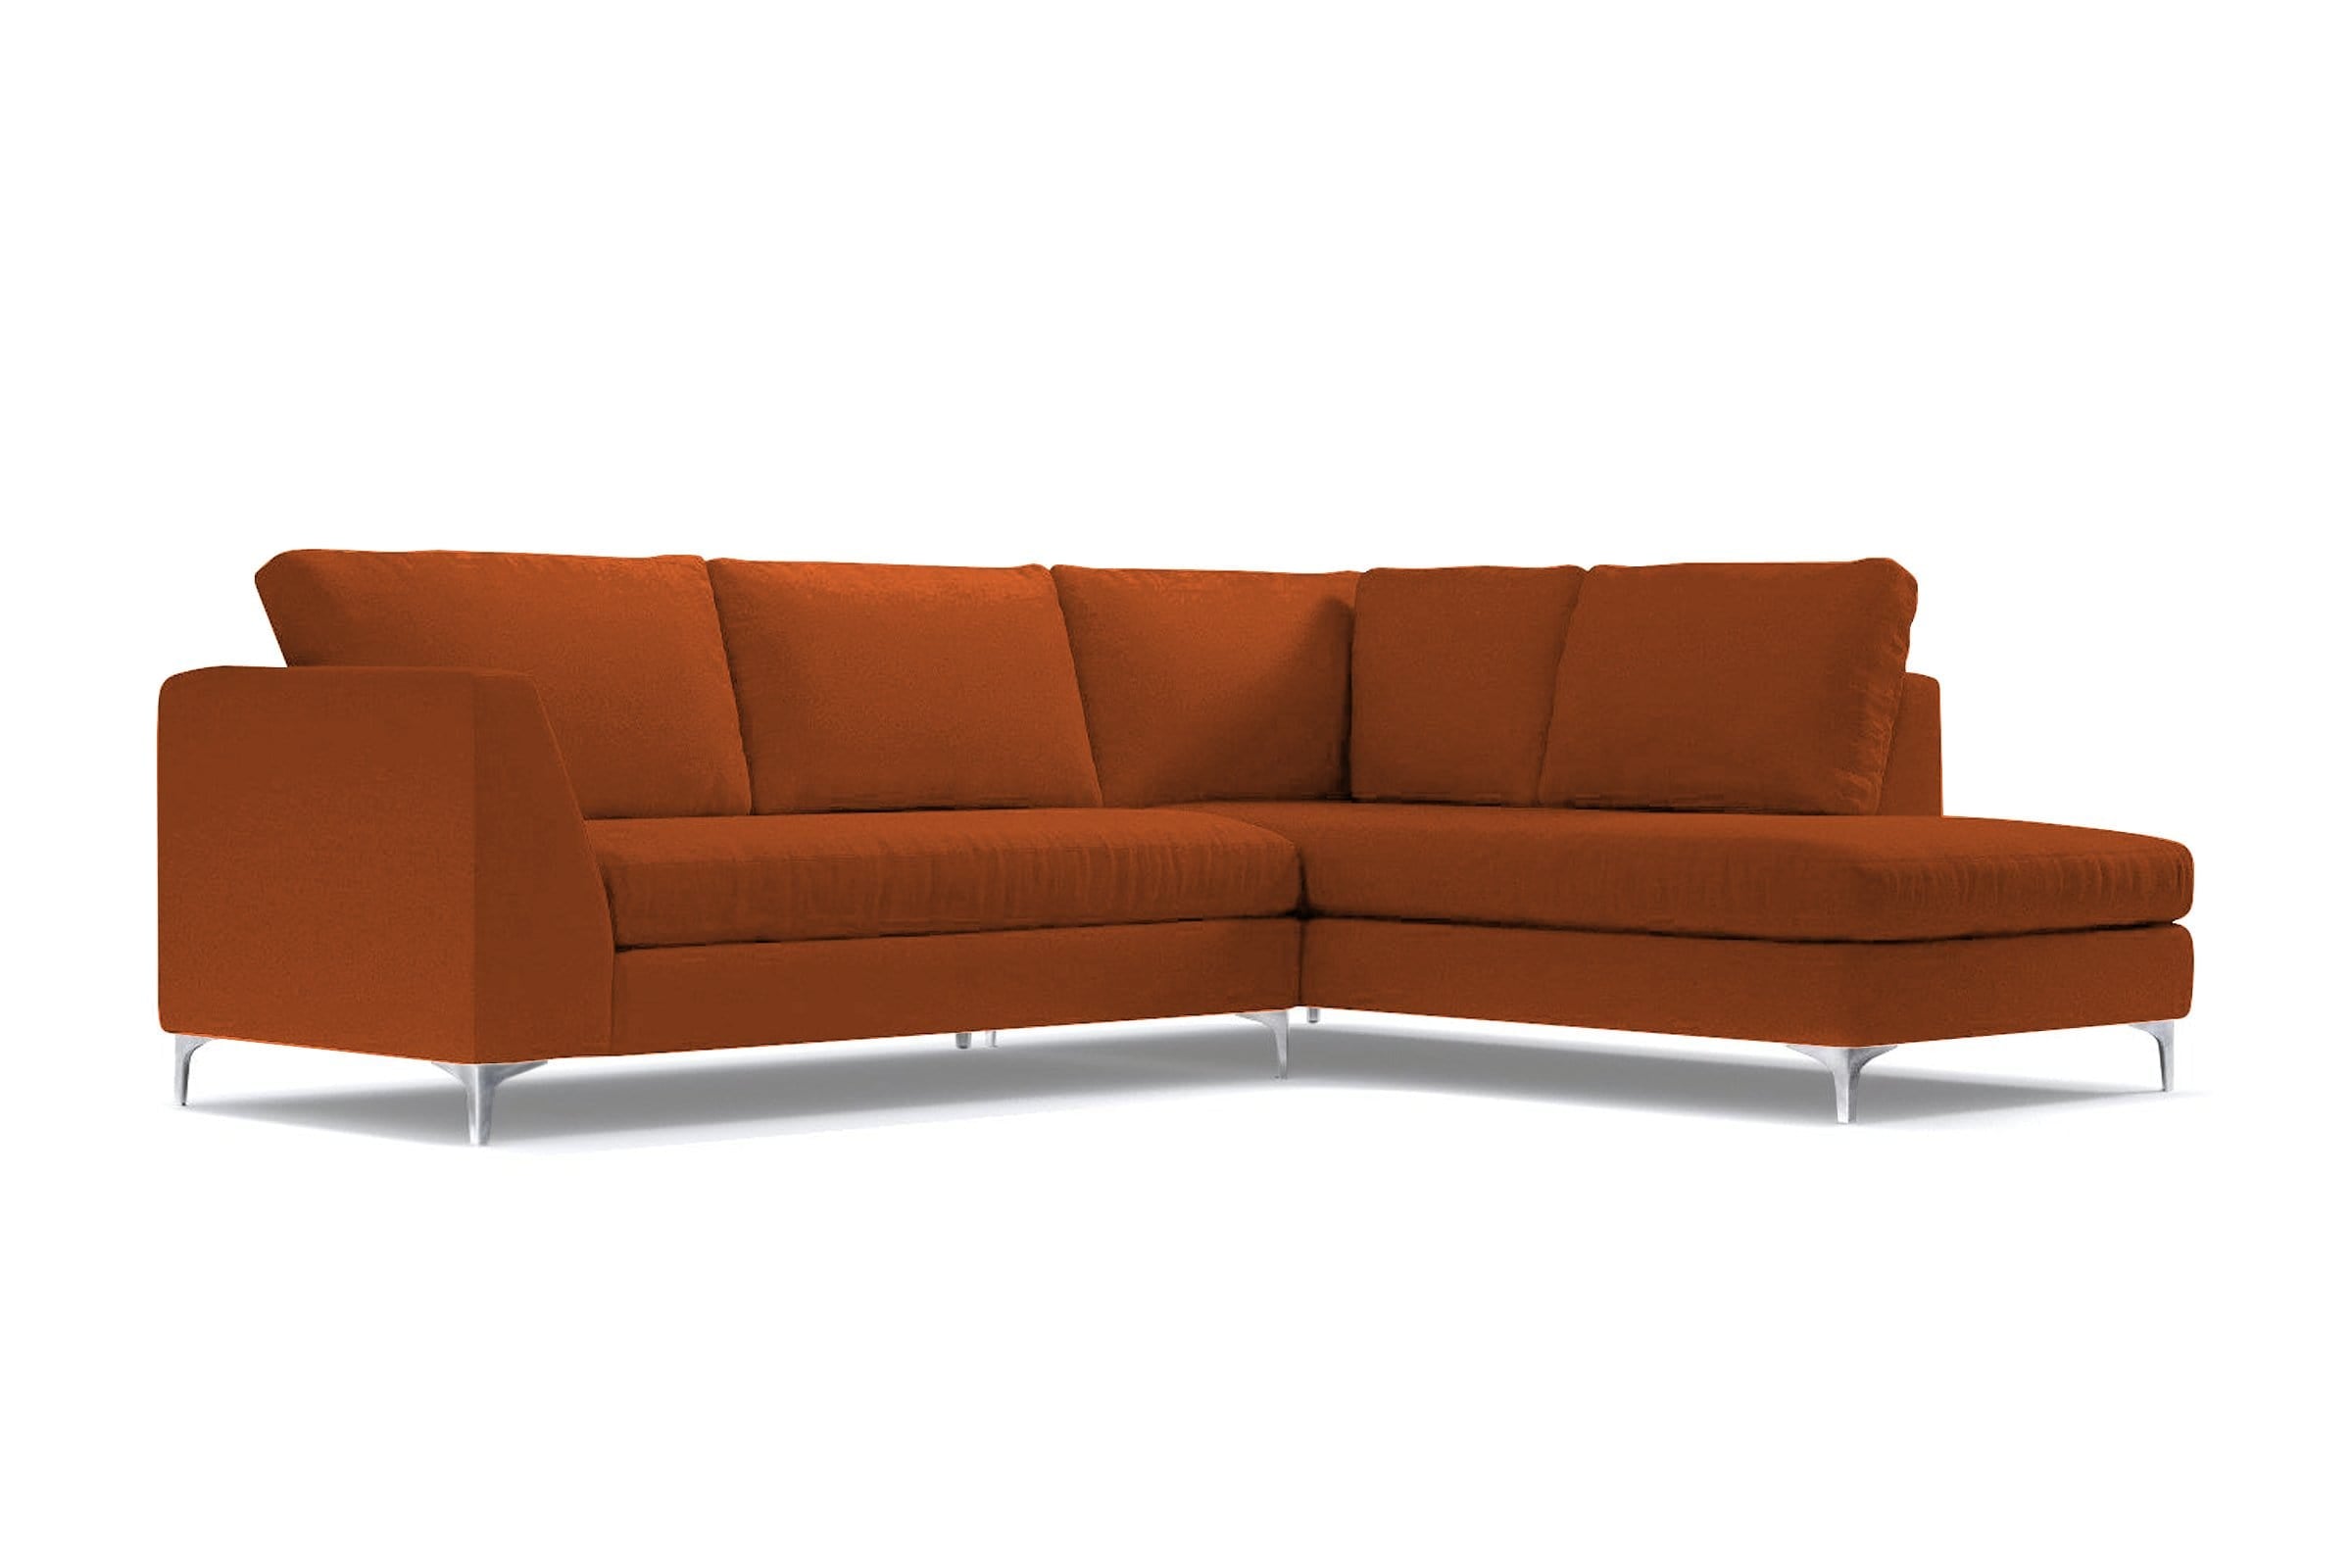 Mulholland 2pc Sectional Sofa - Orange Velvet -  Modern Sectional Sofa Made in USA - Sold by Apt2B